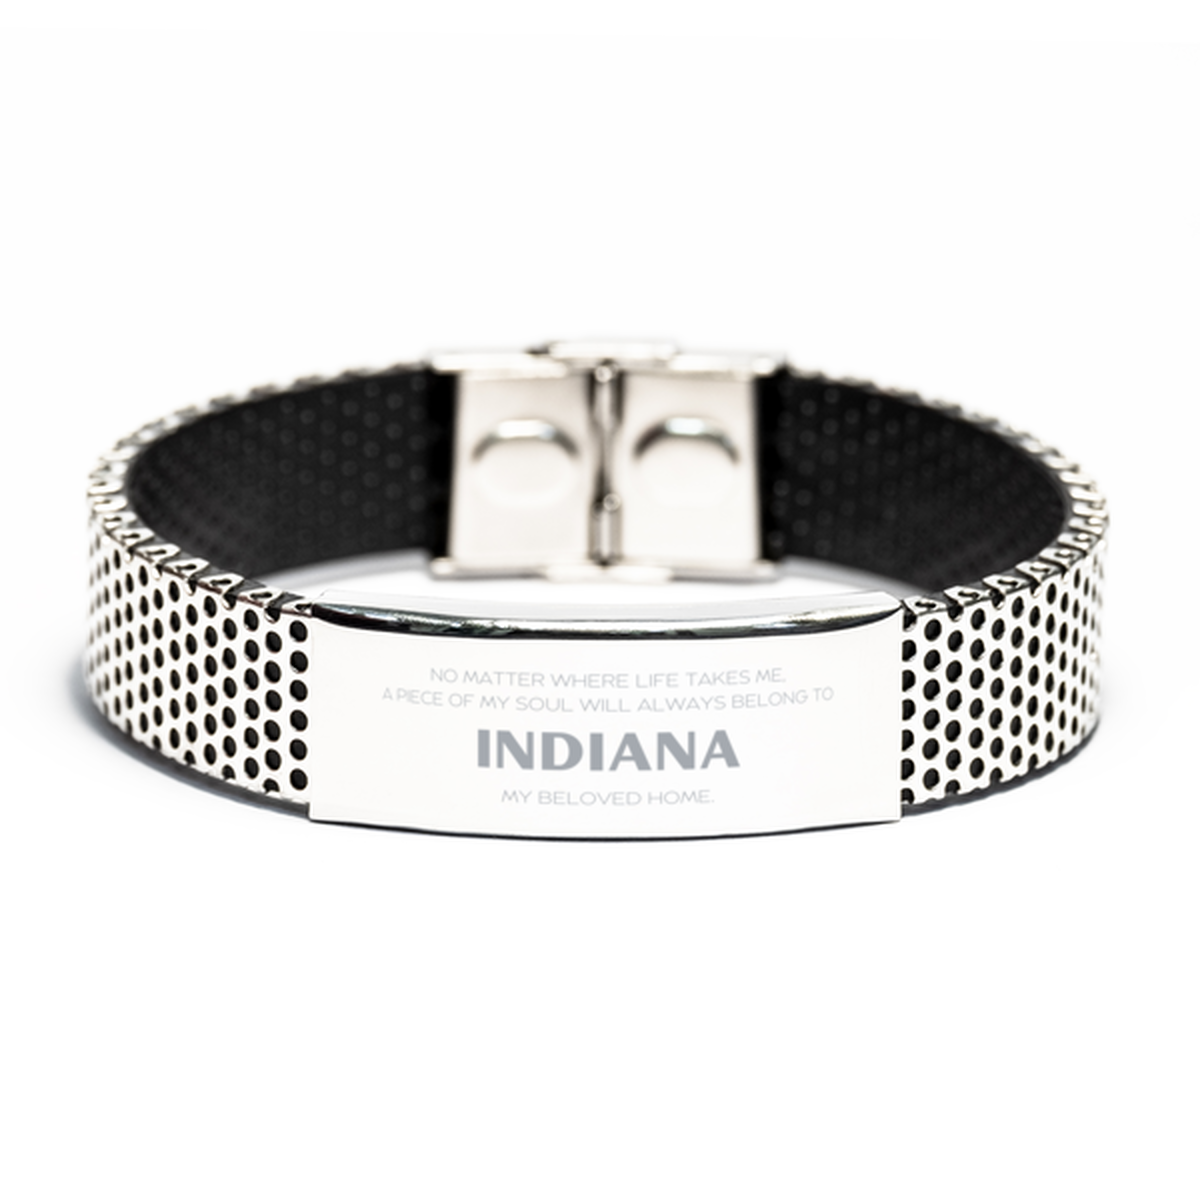 Love Indiana State Gifts, My soul will always belong to Indiana, Proud Stainless Steel Bracelet, Birthday Unique Gifts For Indiana Men, Women, Friends